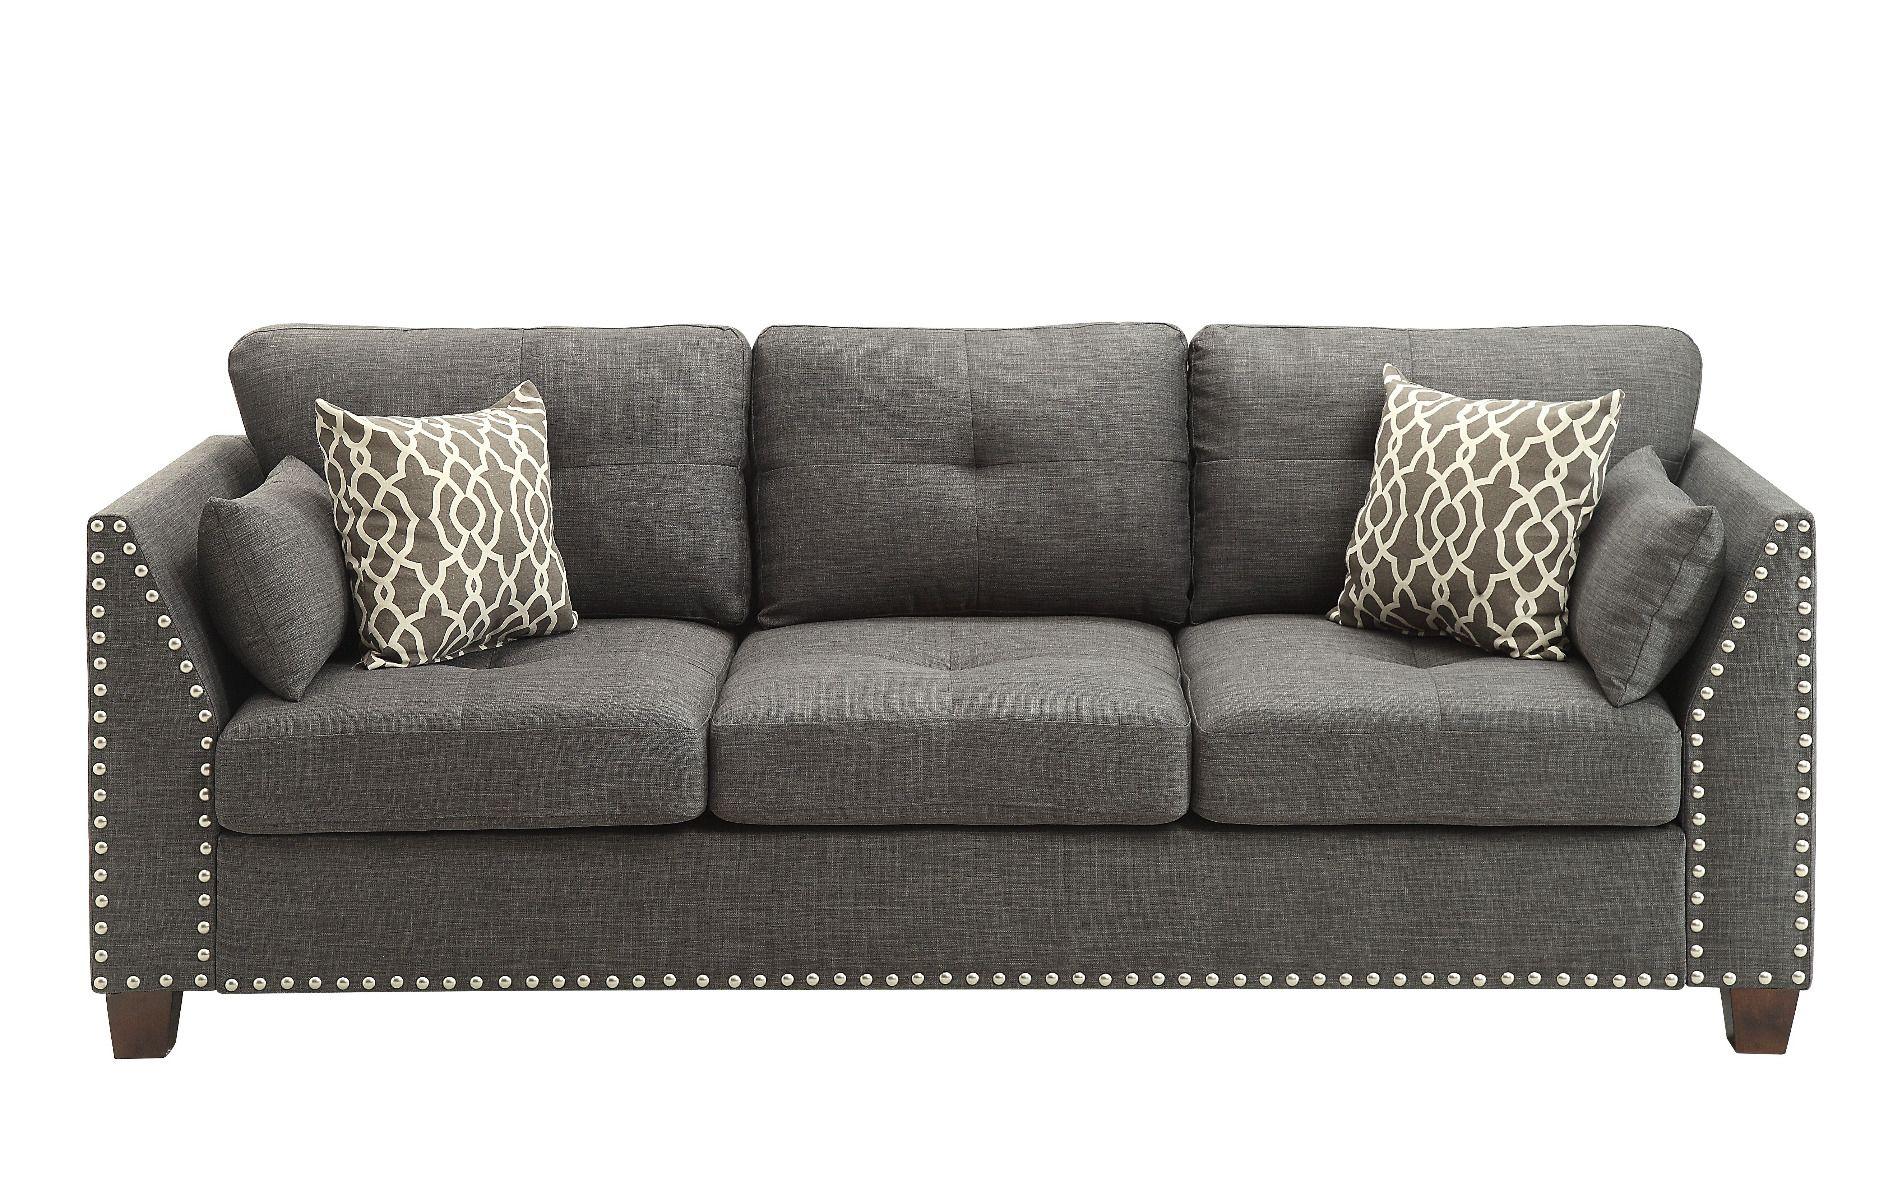 Contemporary, Classic, Simple Sofa Laurissa 52405 in Charcoal Linen